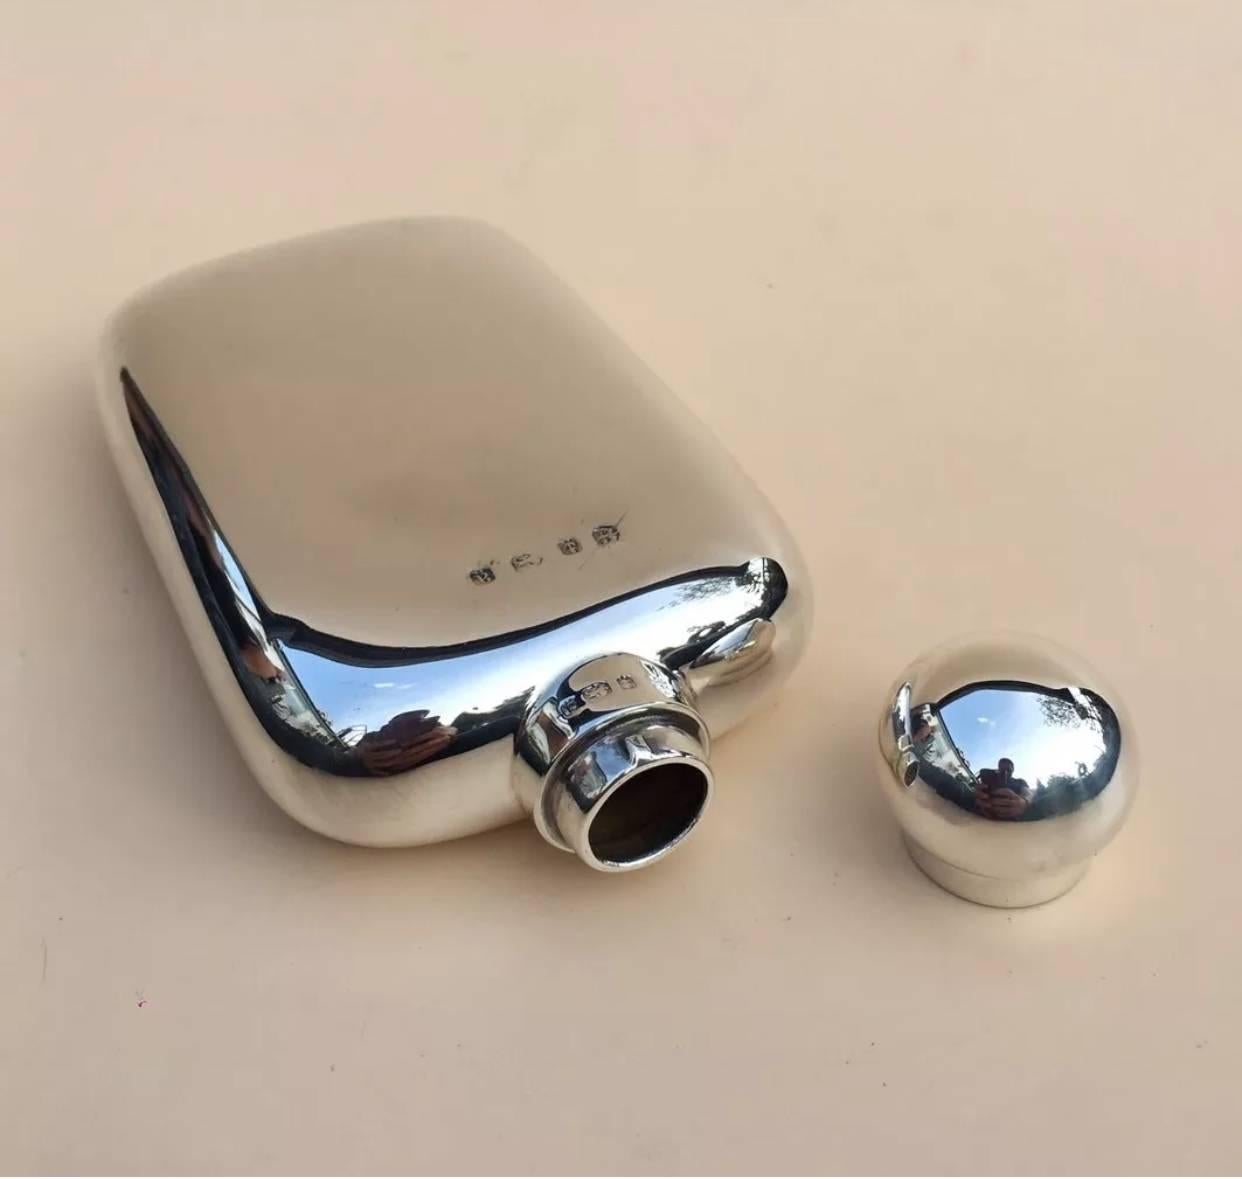 Fine quality vintage silver hip flask by Arthur & John Zimmerman, 1900

Very good quality silver hip flask, it has a nice curve to one side to fit in any pocket, the flask has a lid with turning grip.

The flask is in good condition, no dents,